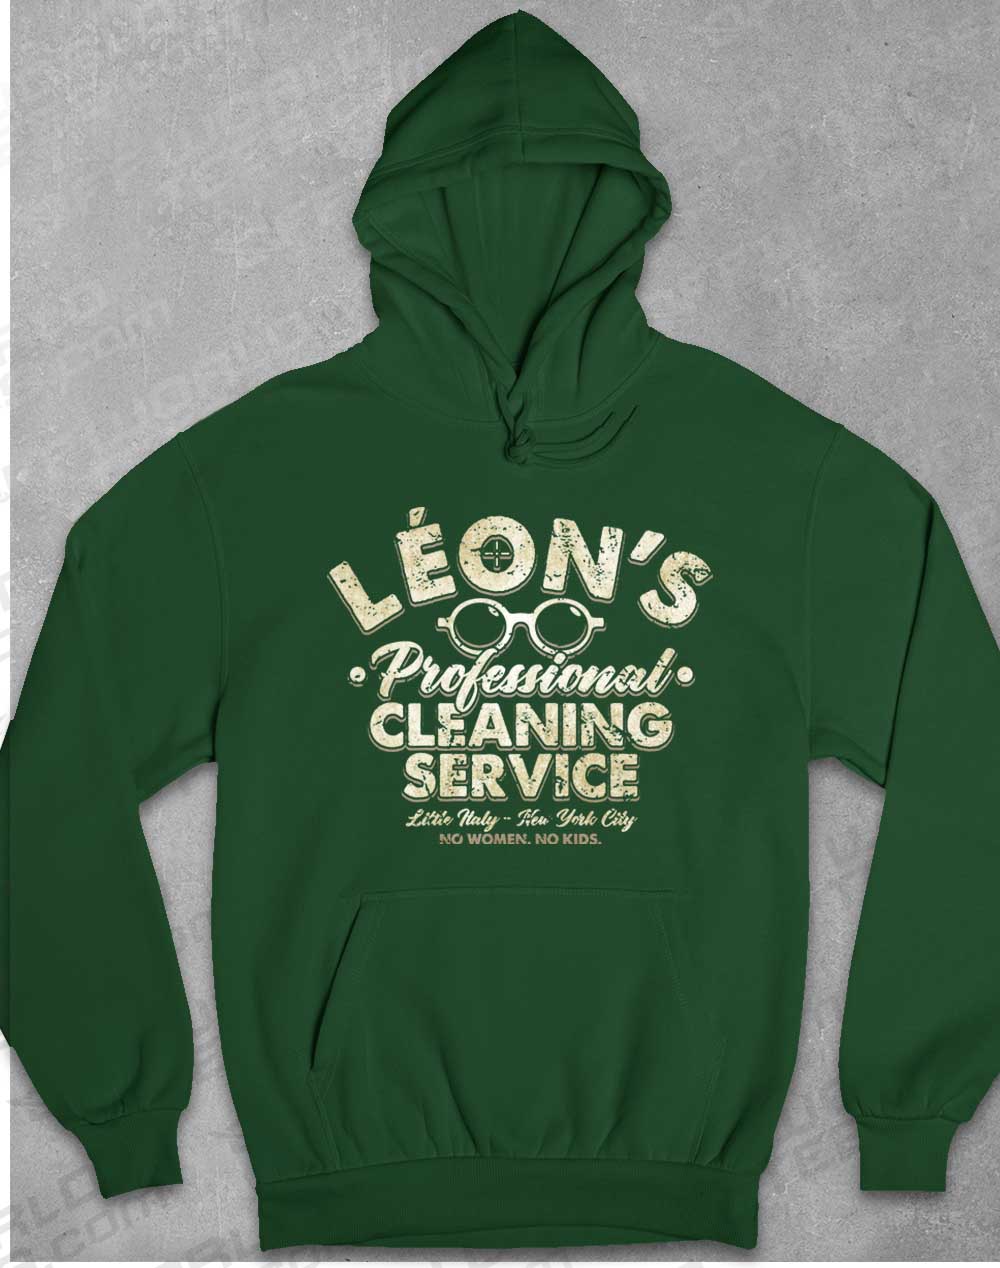 Bottle Green - Leon's Professional Cleaning Hoodie